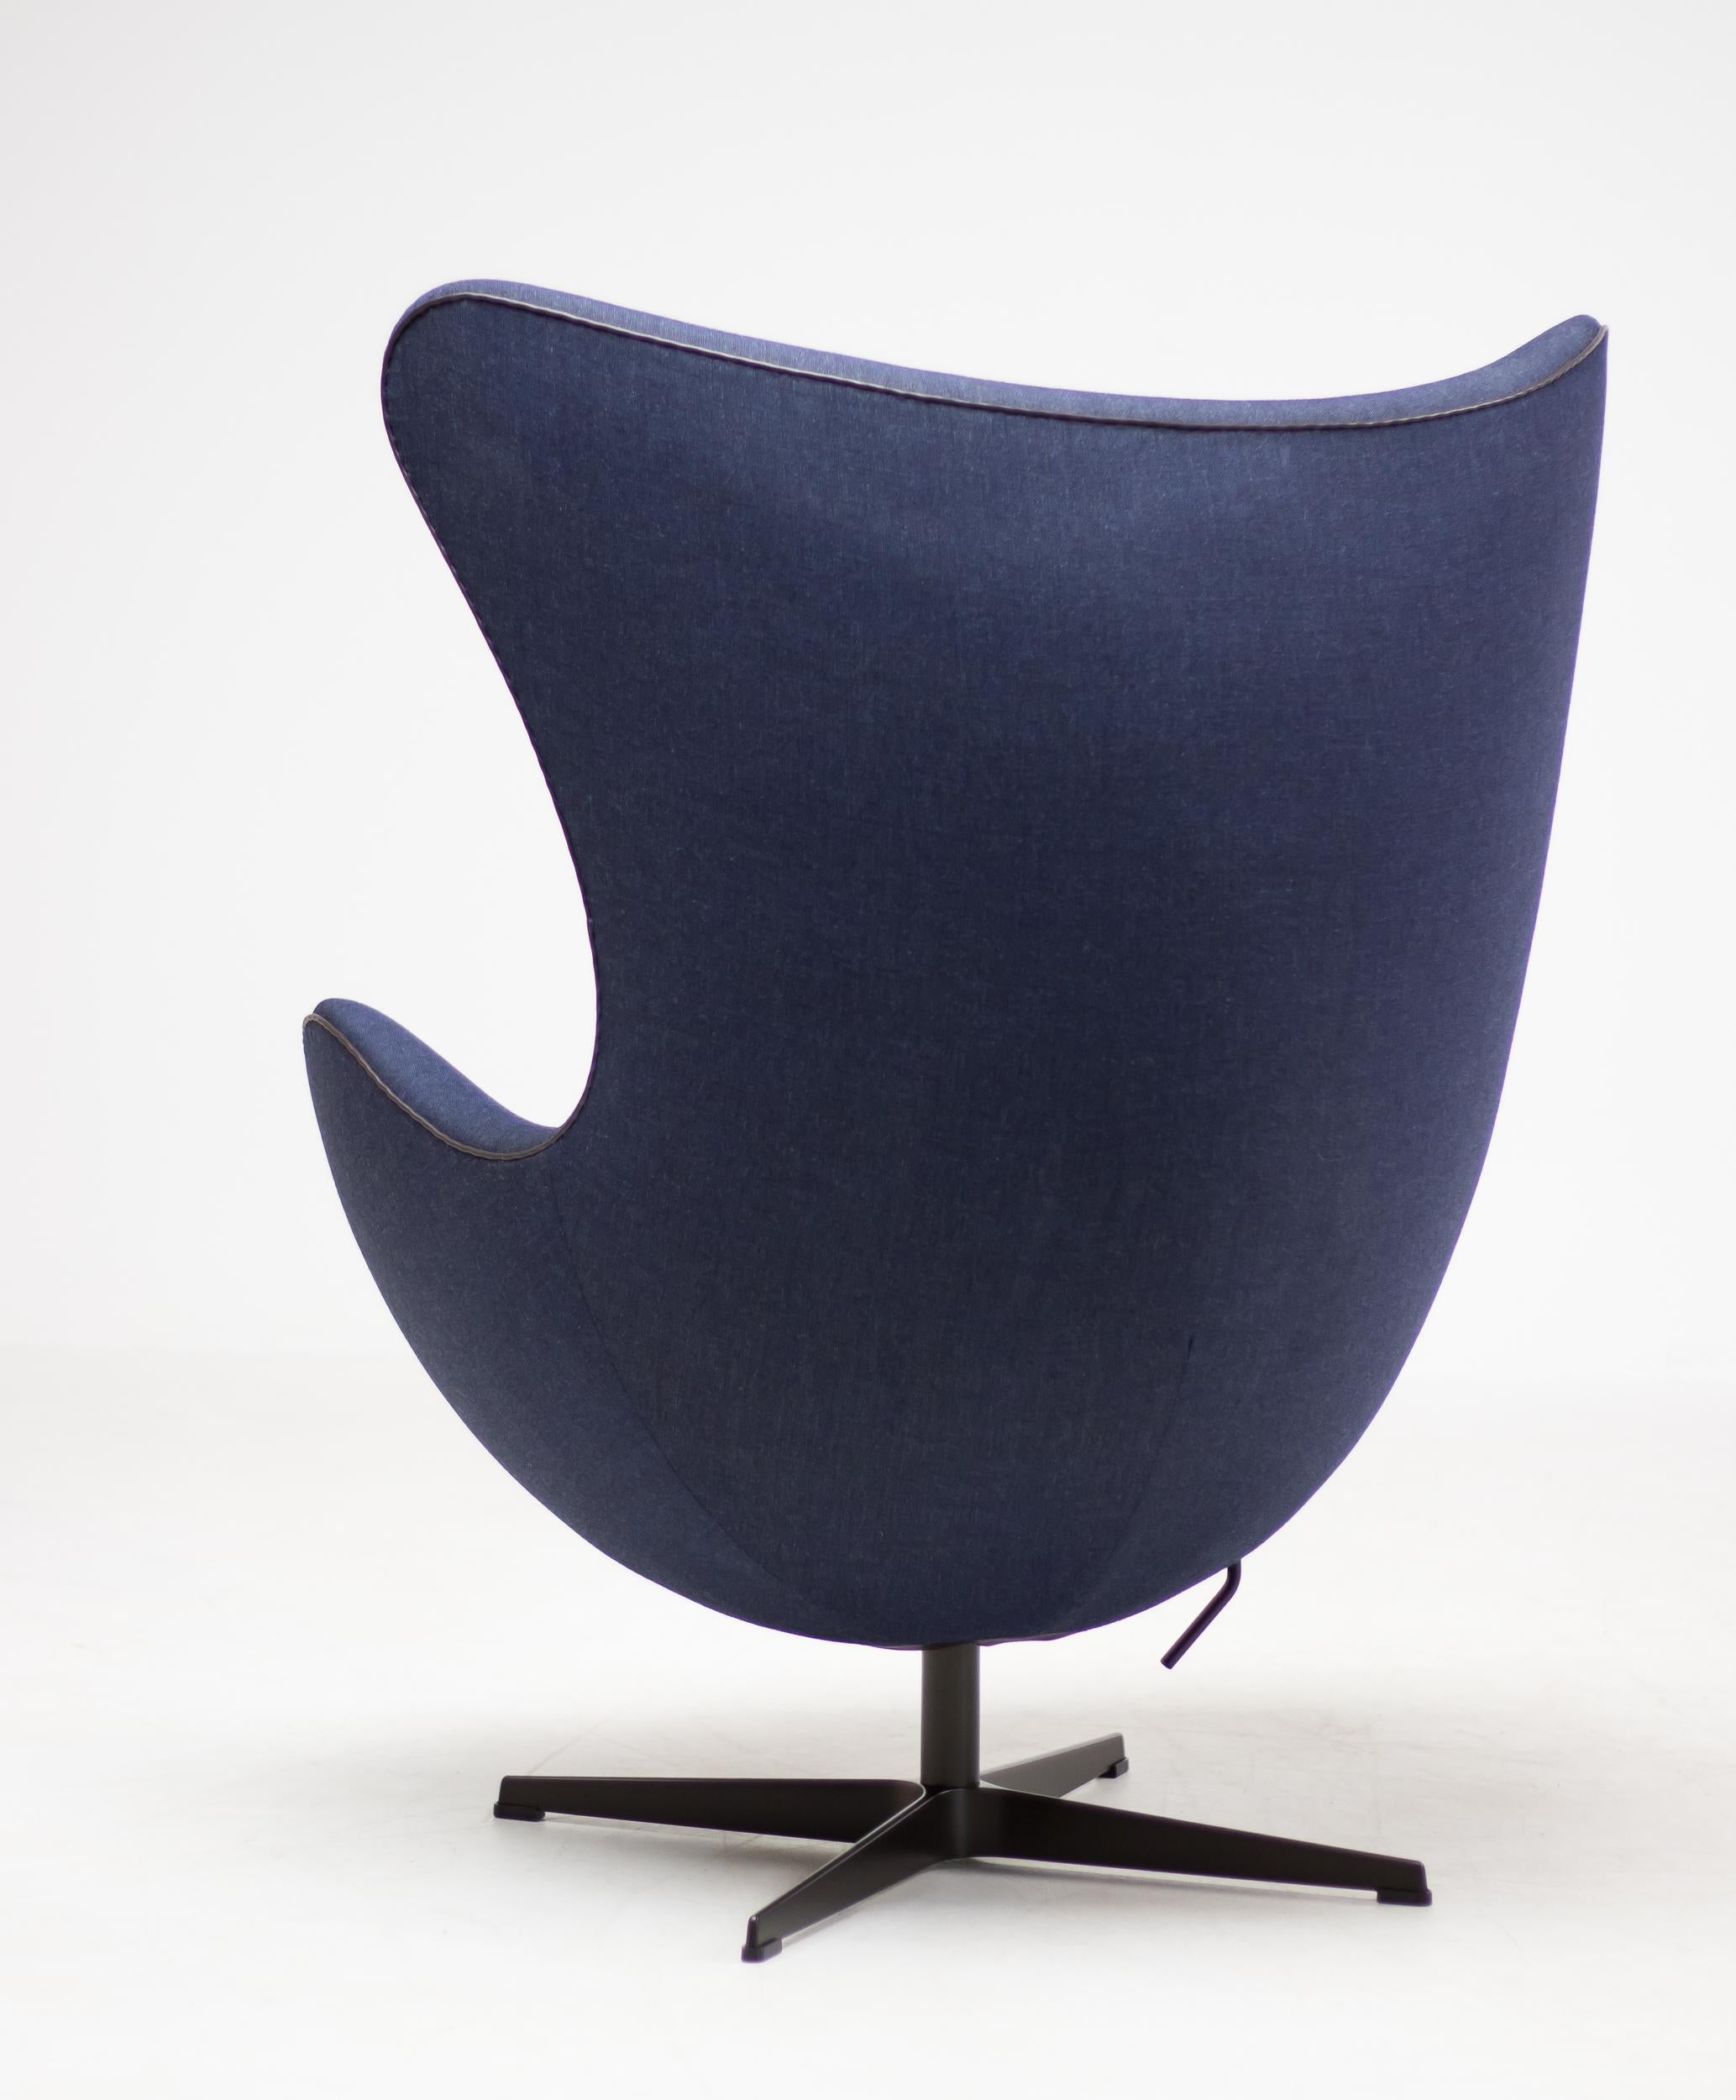 Aluminum Limited Edition Blue Canvas Egg Chair by Arne Jacobsen